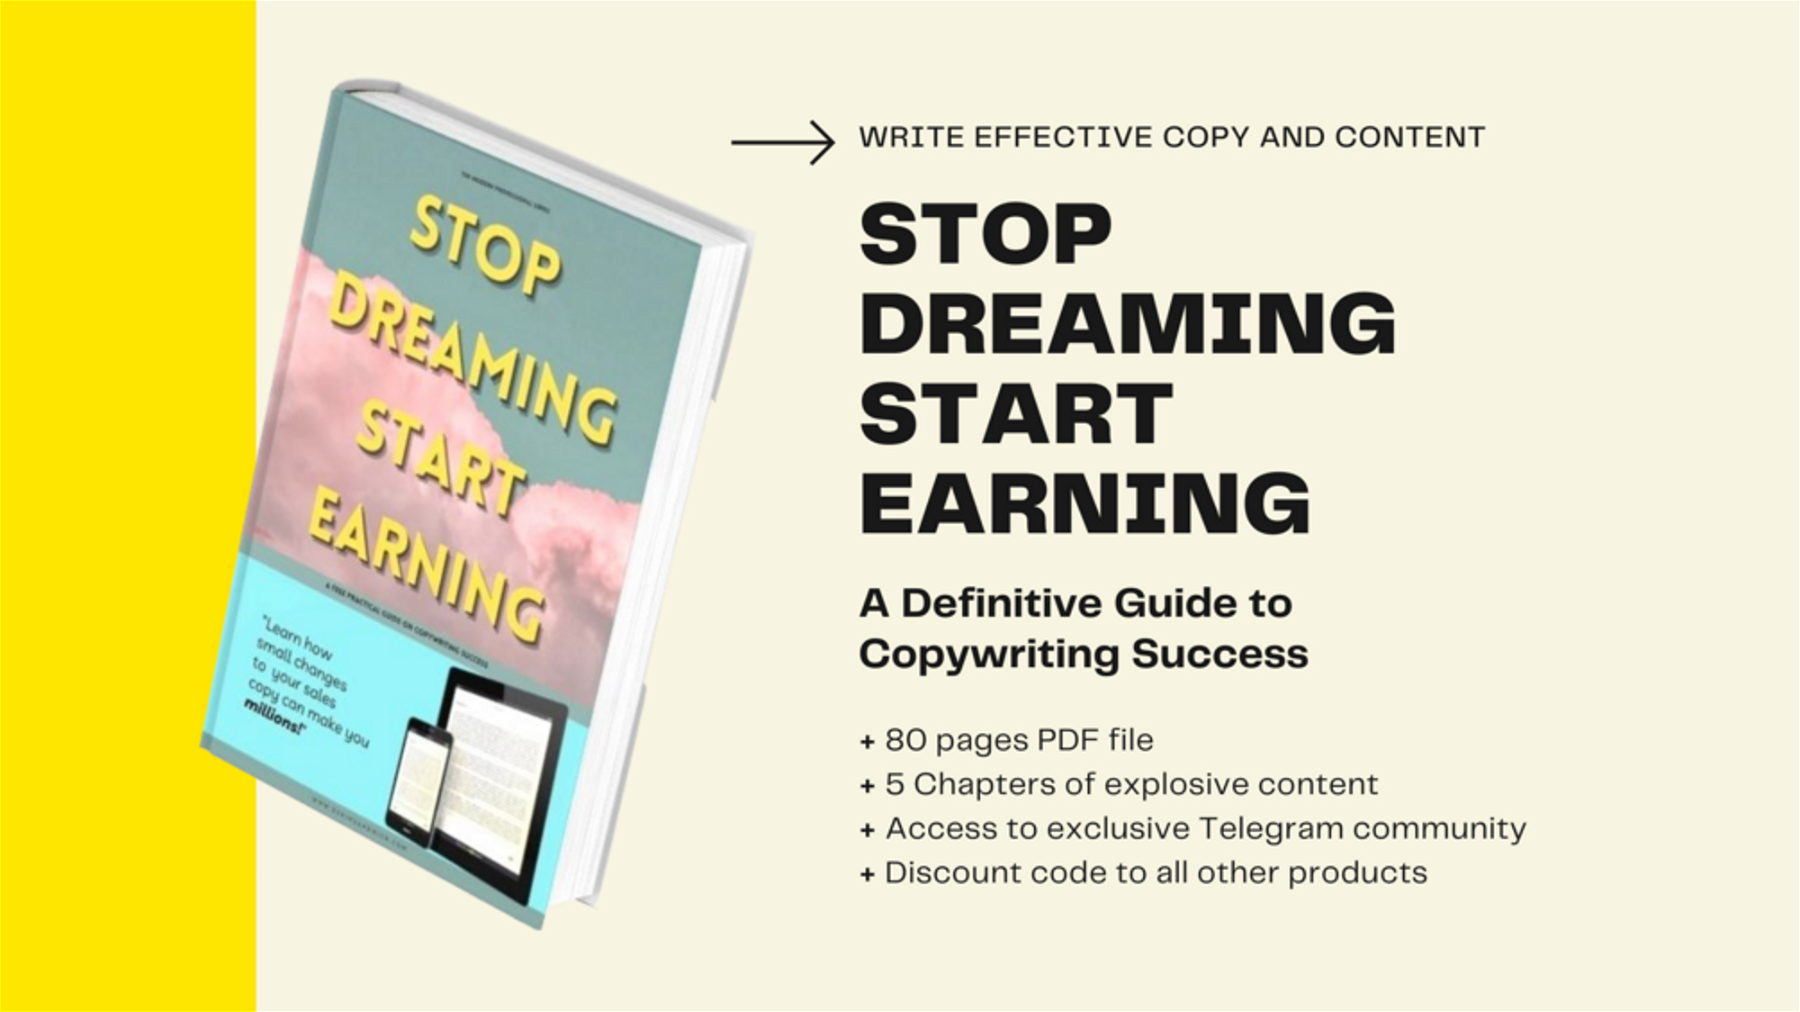 Stop Dreaming Start Earning | definitive guide to copywriting success eBook